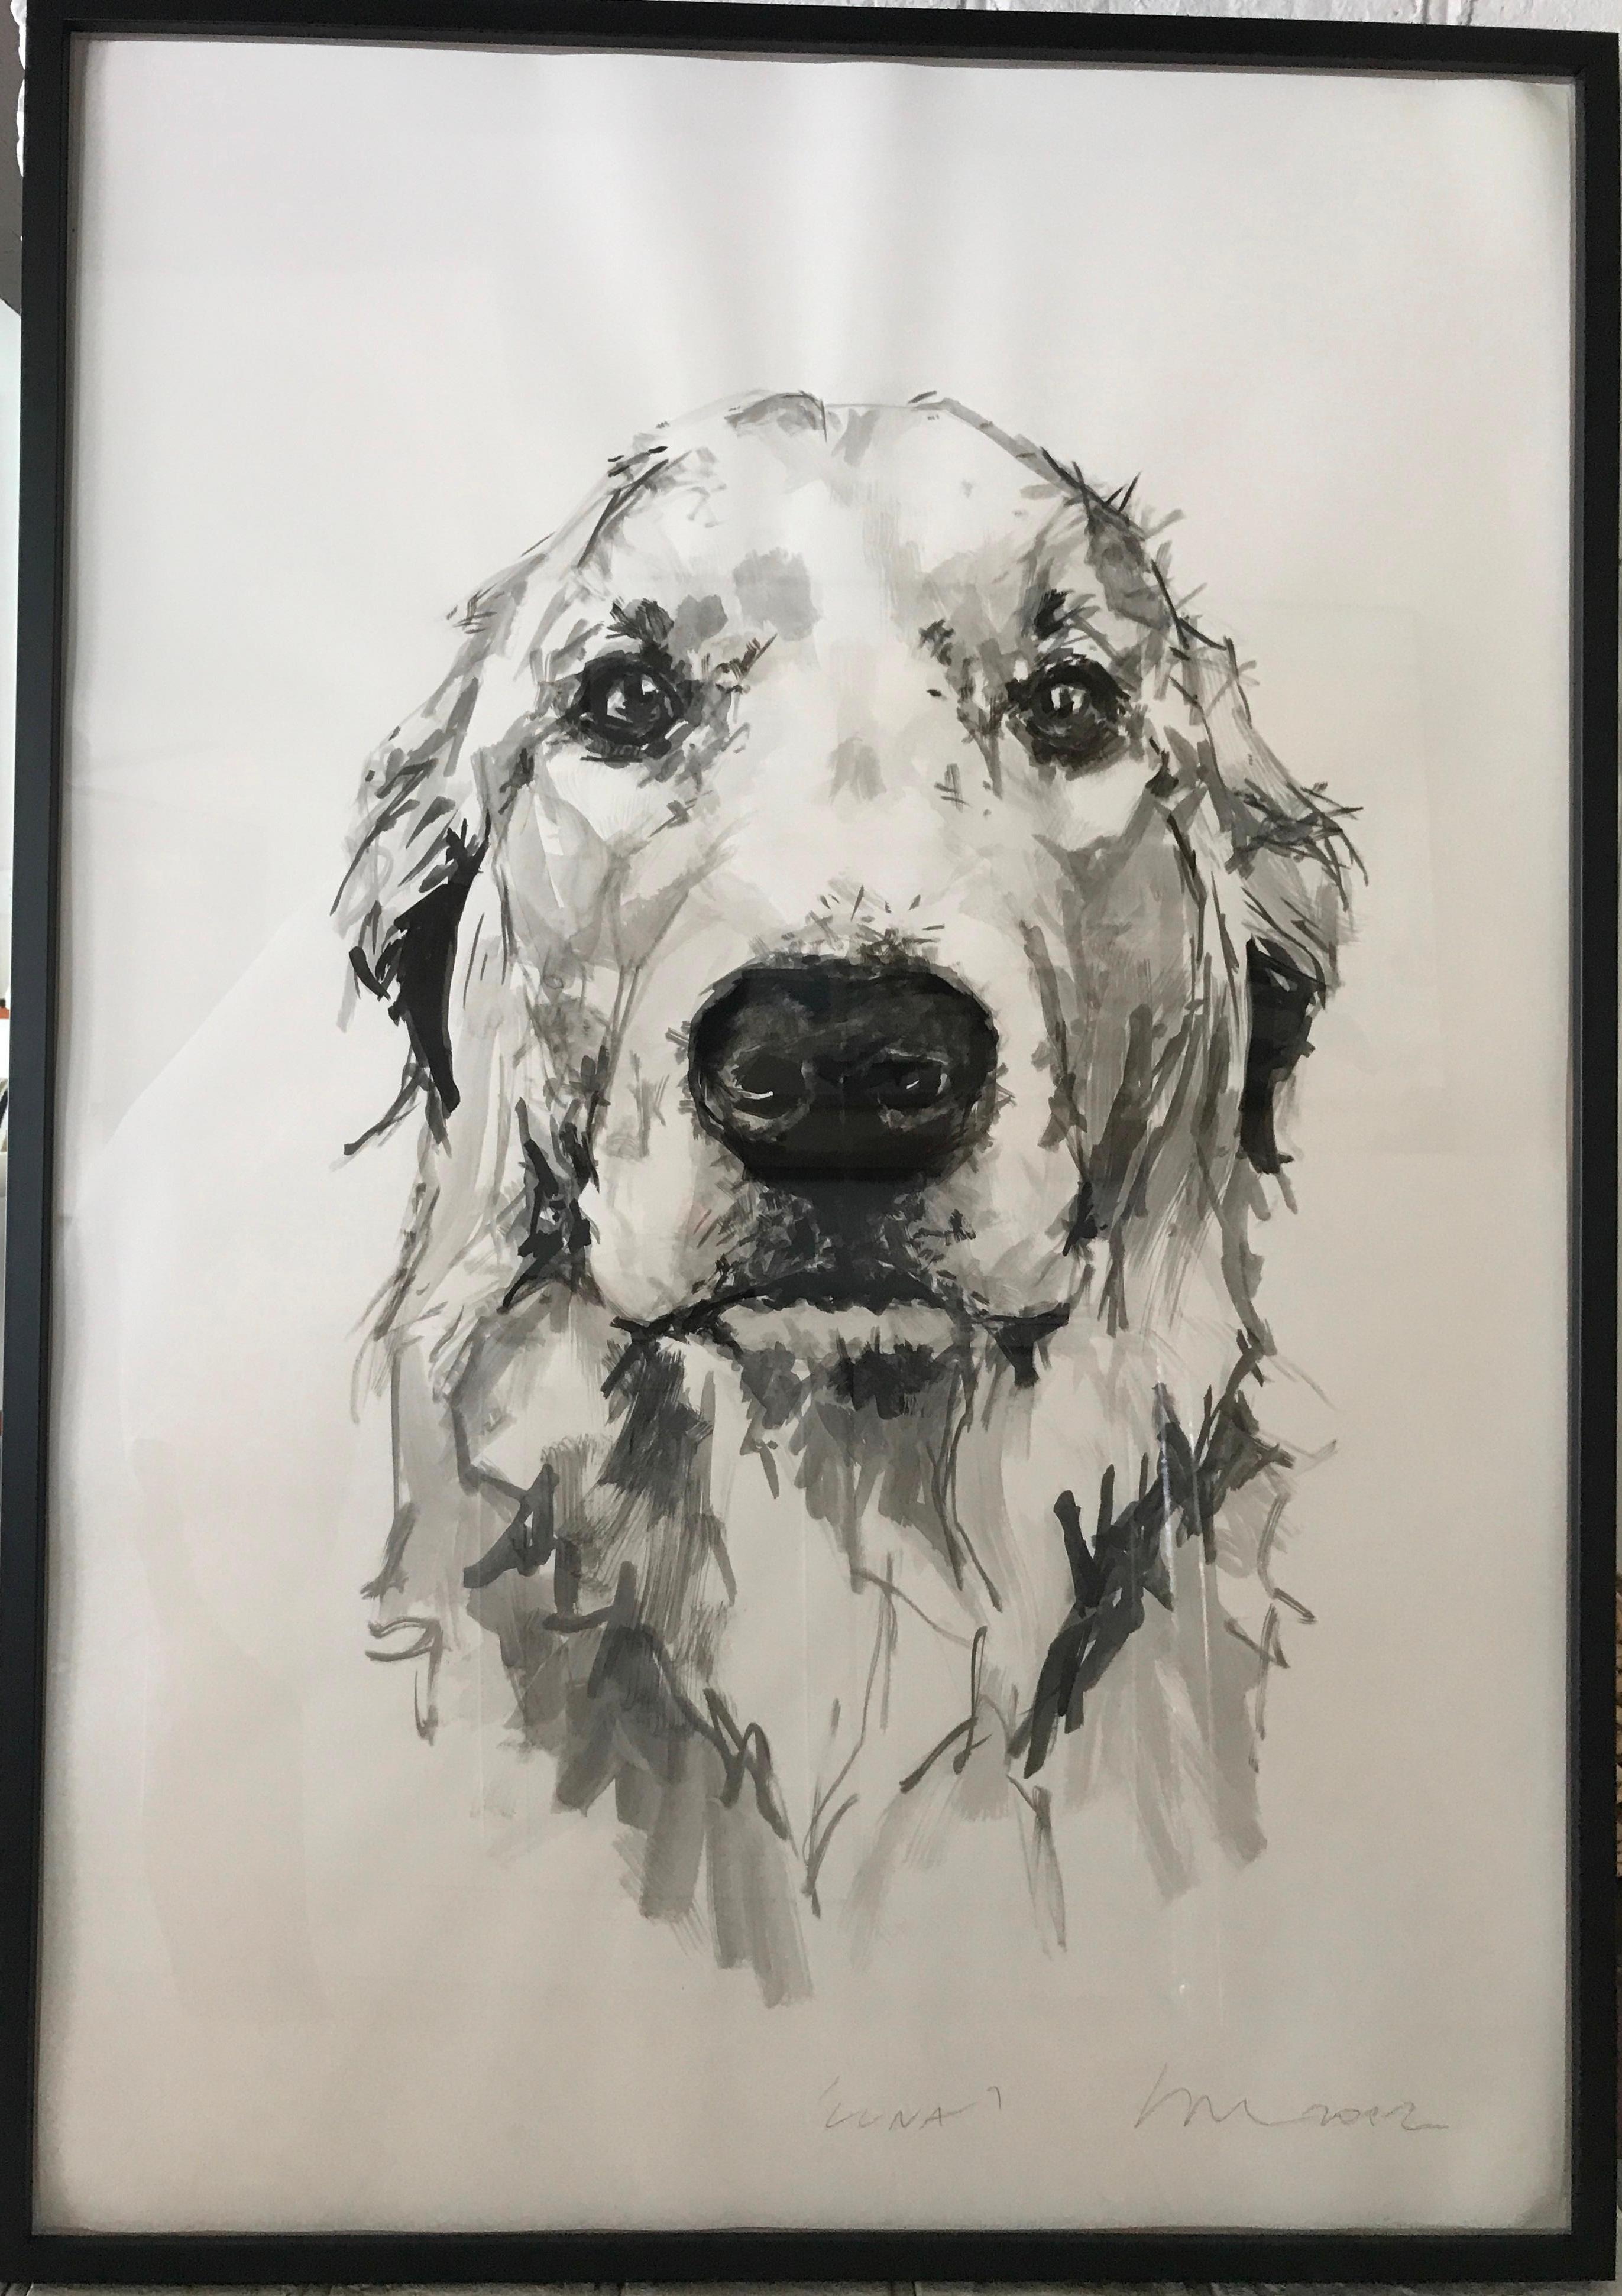 Golden Retriever, dog, This stunning large black and white ink painting of a Golden Retriever, is a contemporary minimal portrait in ink wash on Heritage paper 200 gsm paper. Ian Mason's portraits of dogs are very striking as he is able to capture